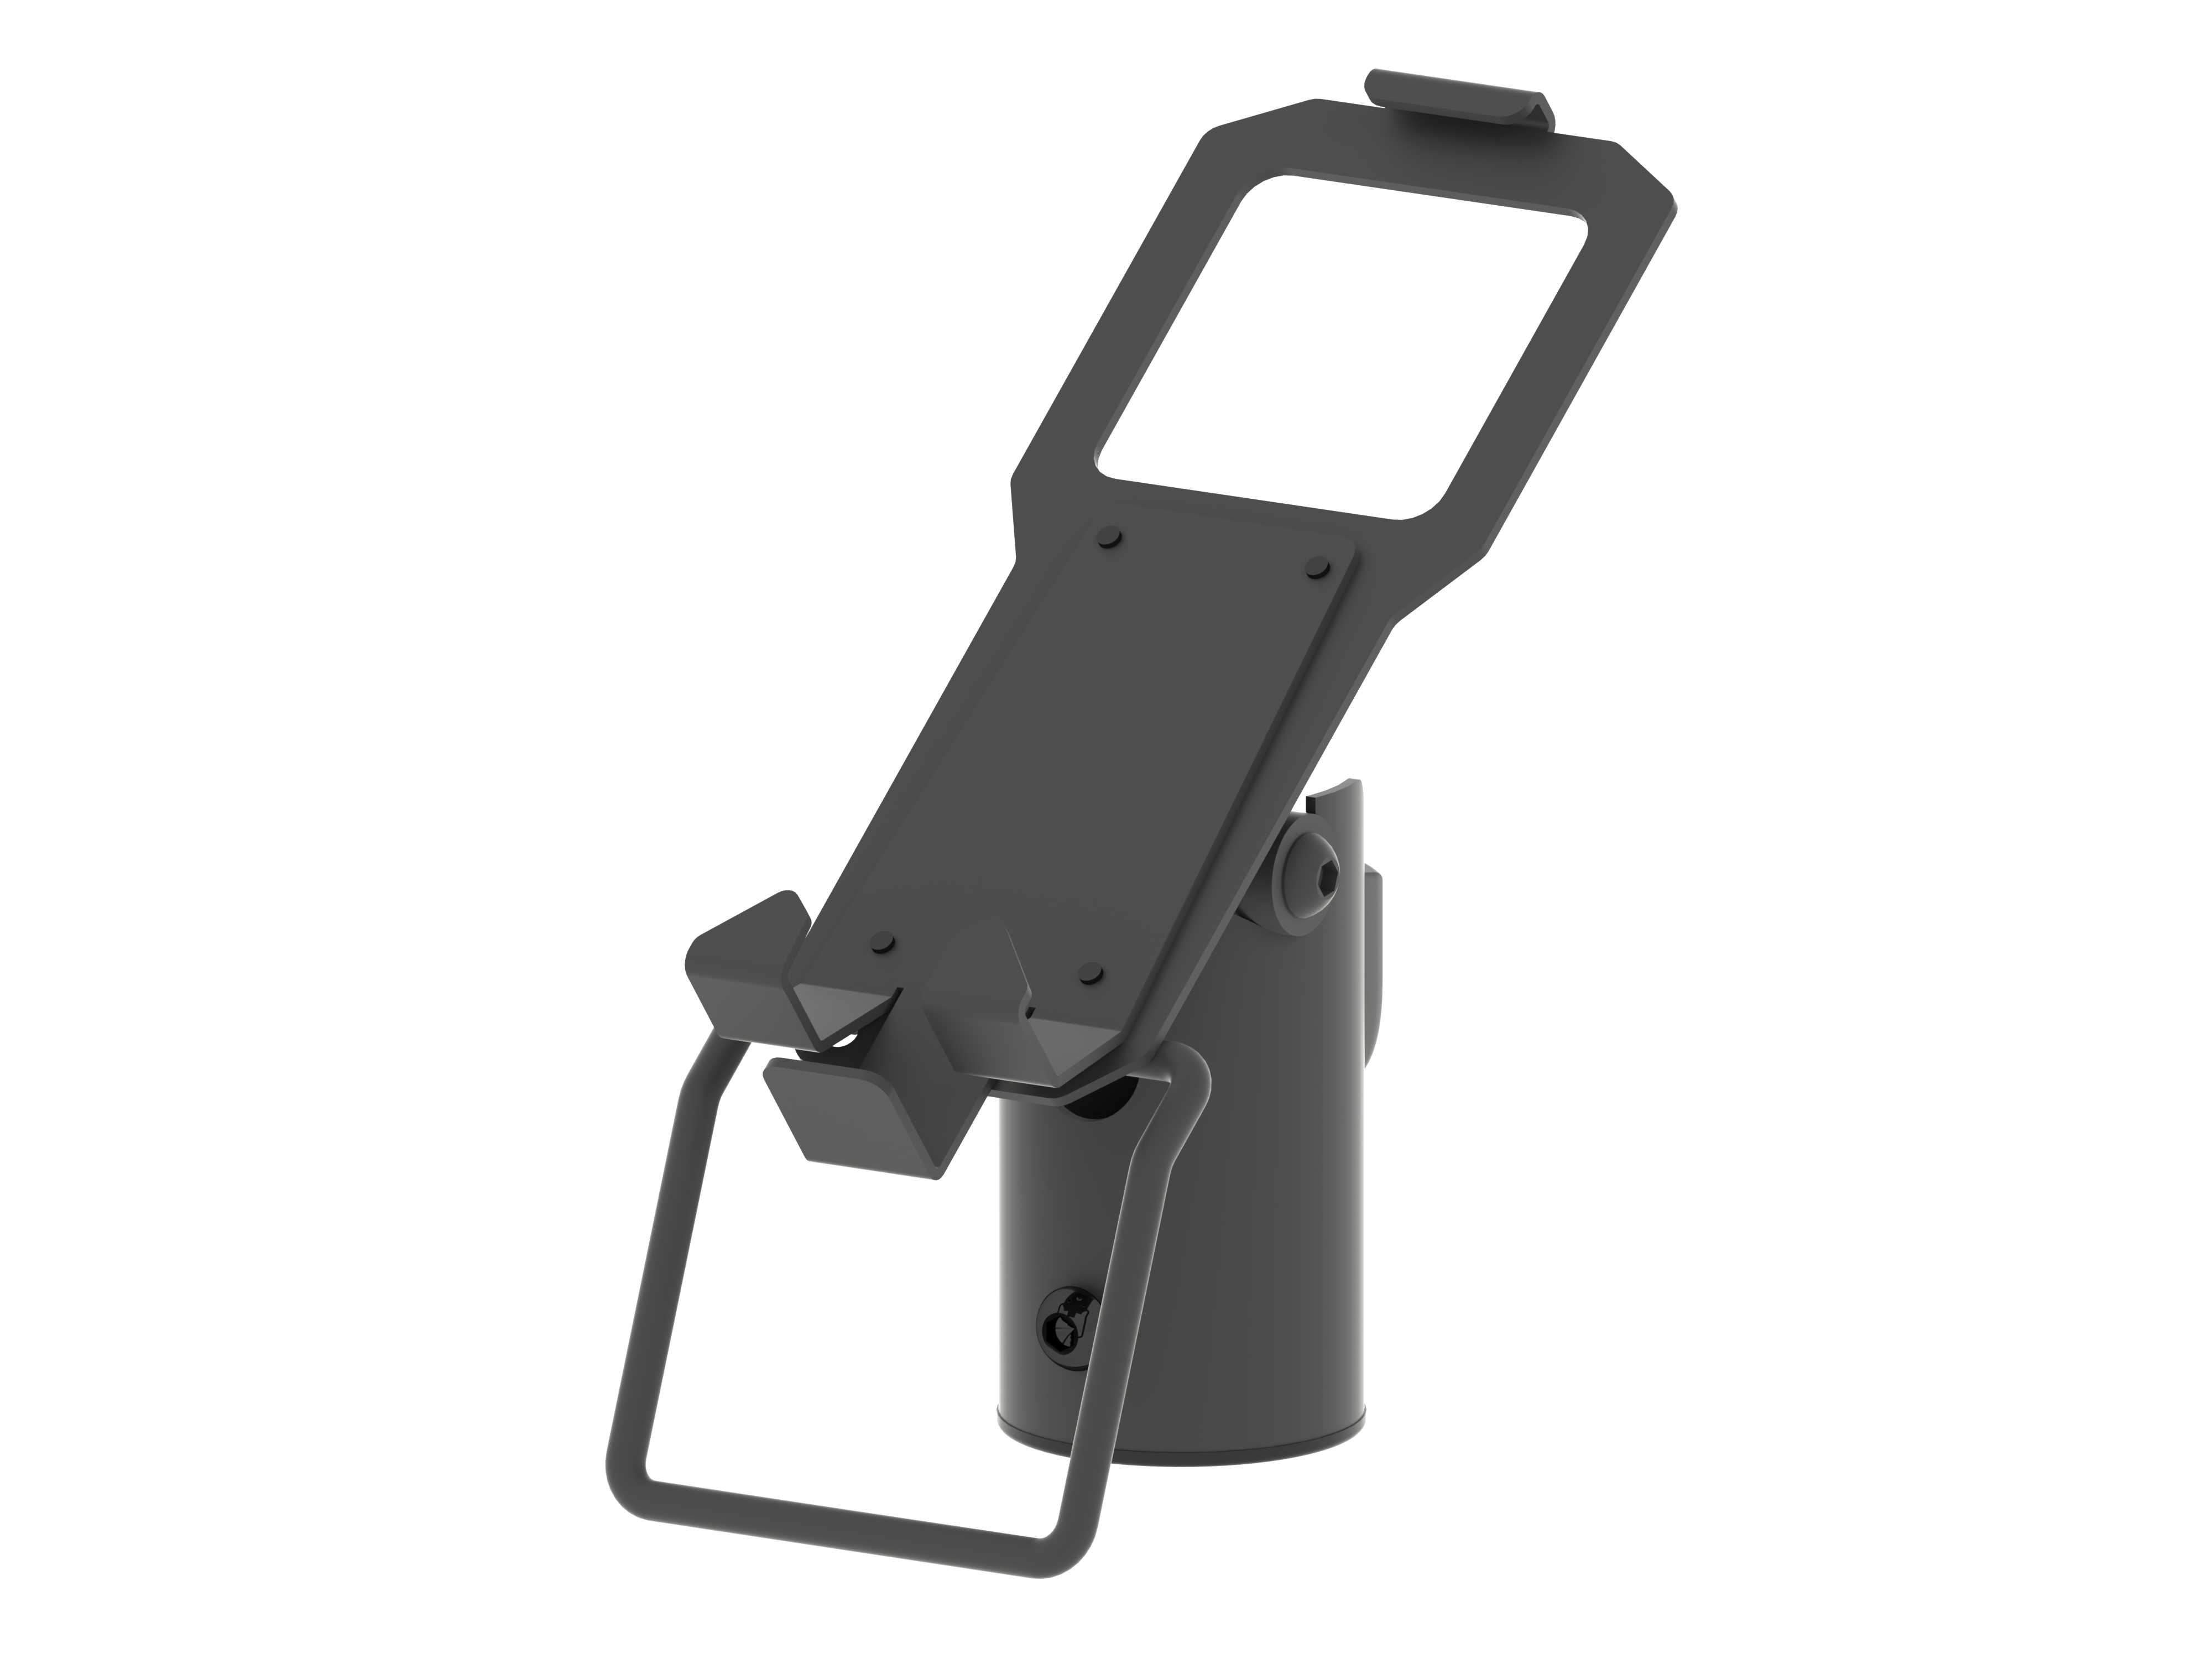 Steel stand for pin pad SUNMI P200 LITE